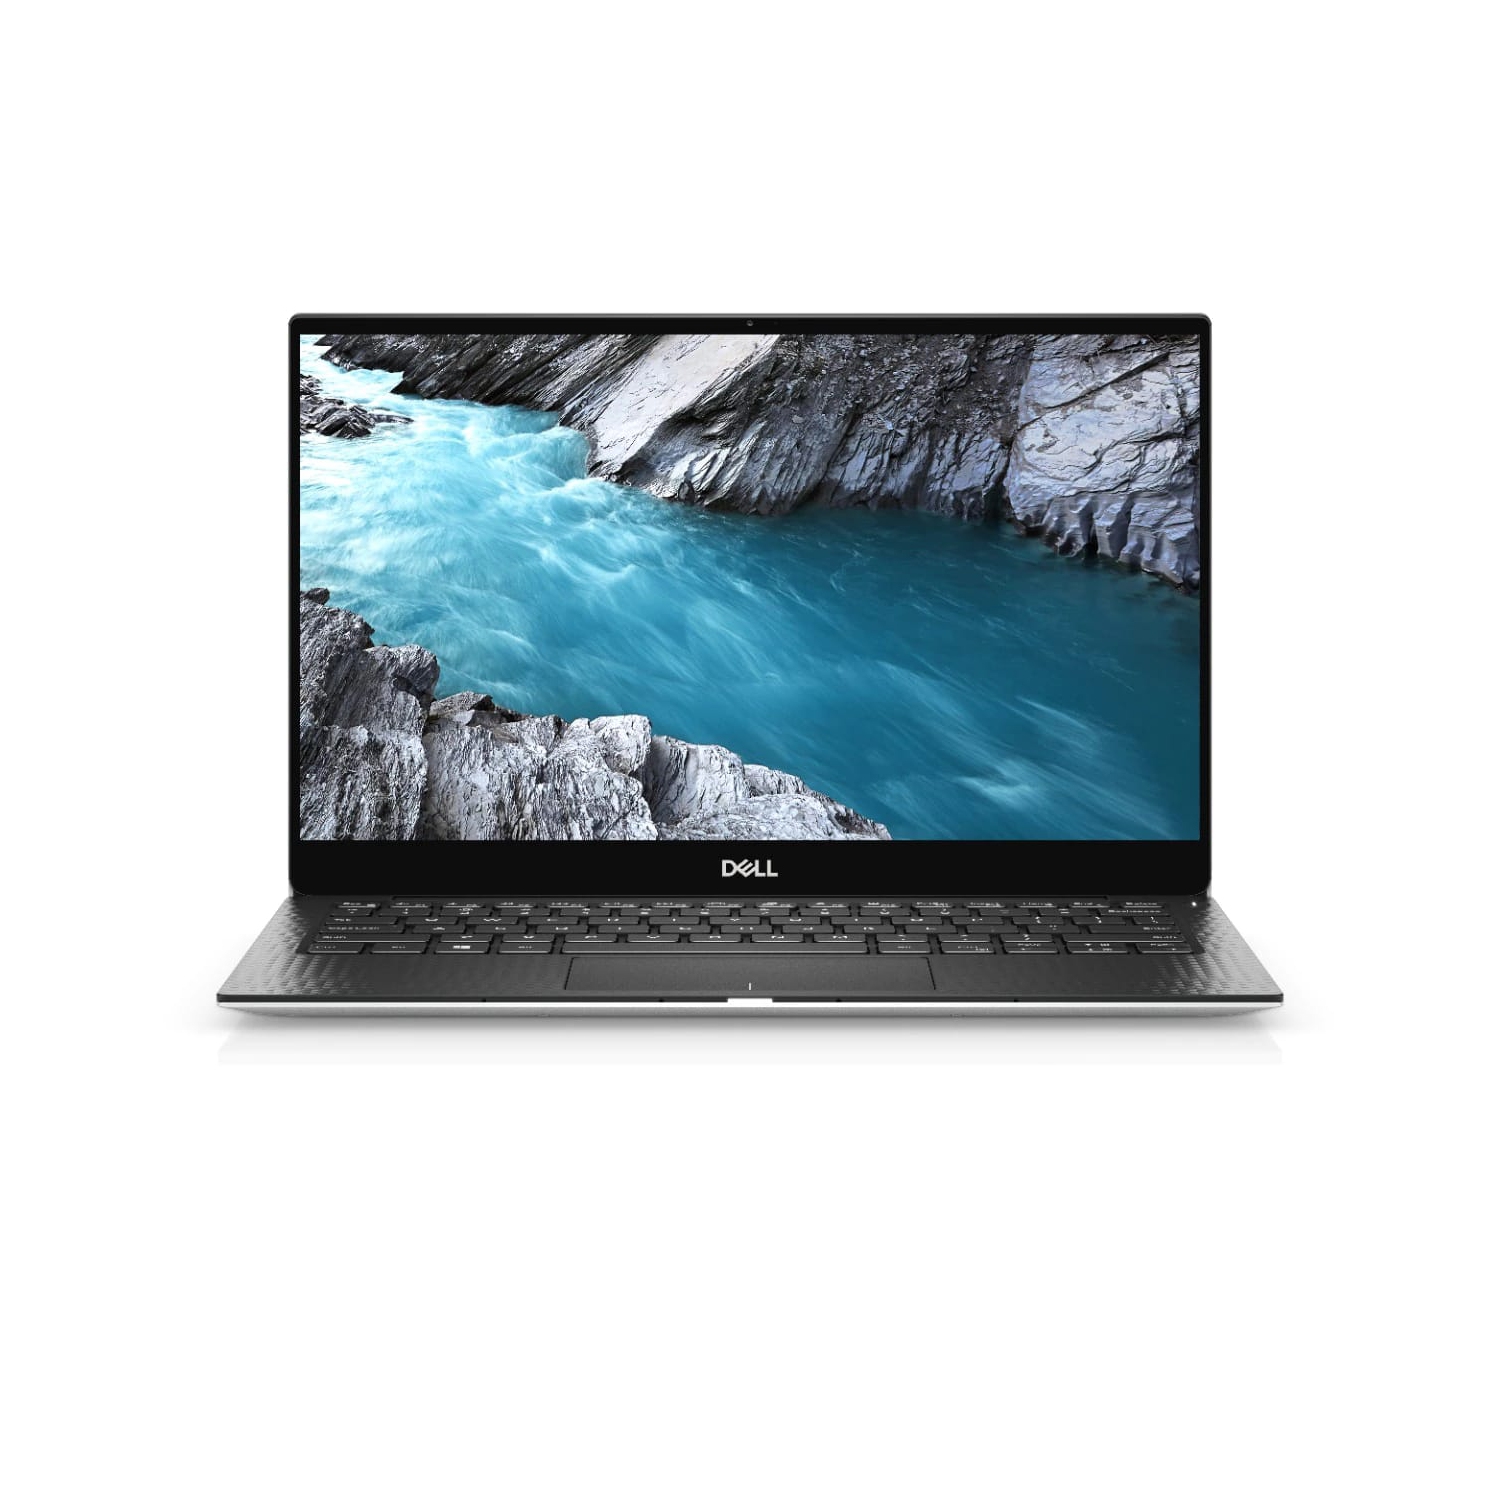 Refurbished (Excellent) - Dell XPS 13 9305 Laptop (2020) | 13.3" FHD Touch | Core i5 - 256GB SSD - 8GB RAM | 4 Cores @ 4.2 GHz - 11th Gen CPU Certified Refurbished